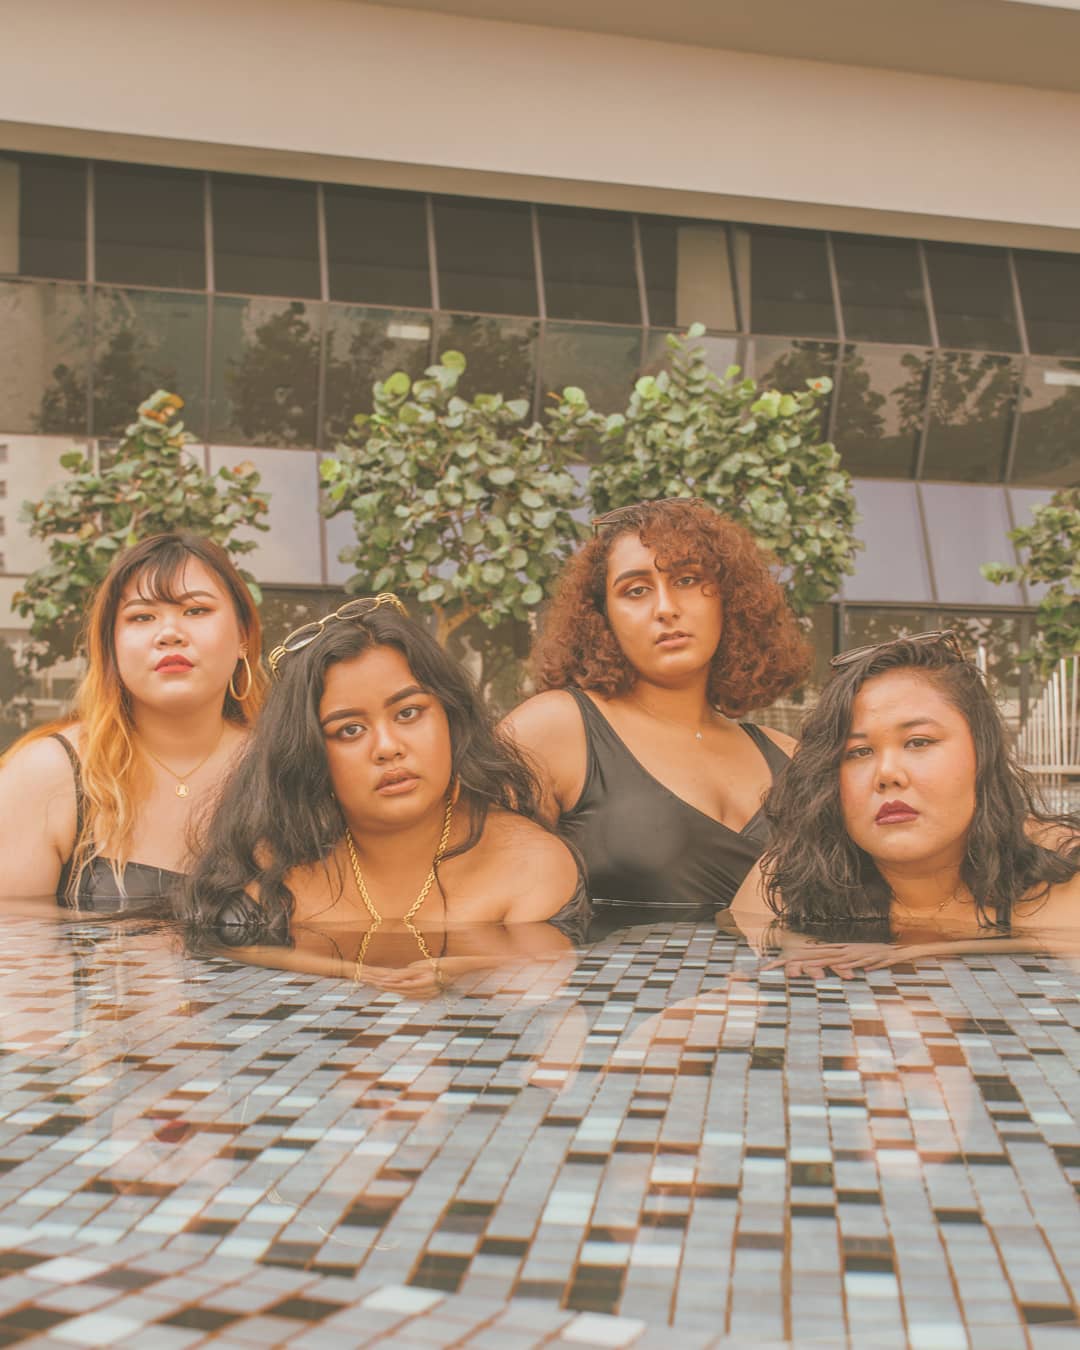 Plus Size Art: These Photos of Plus Size Asian Women Poolside are giving us LIFE!